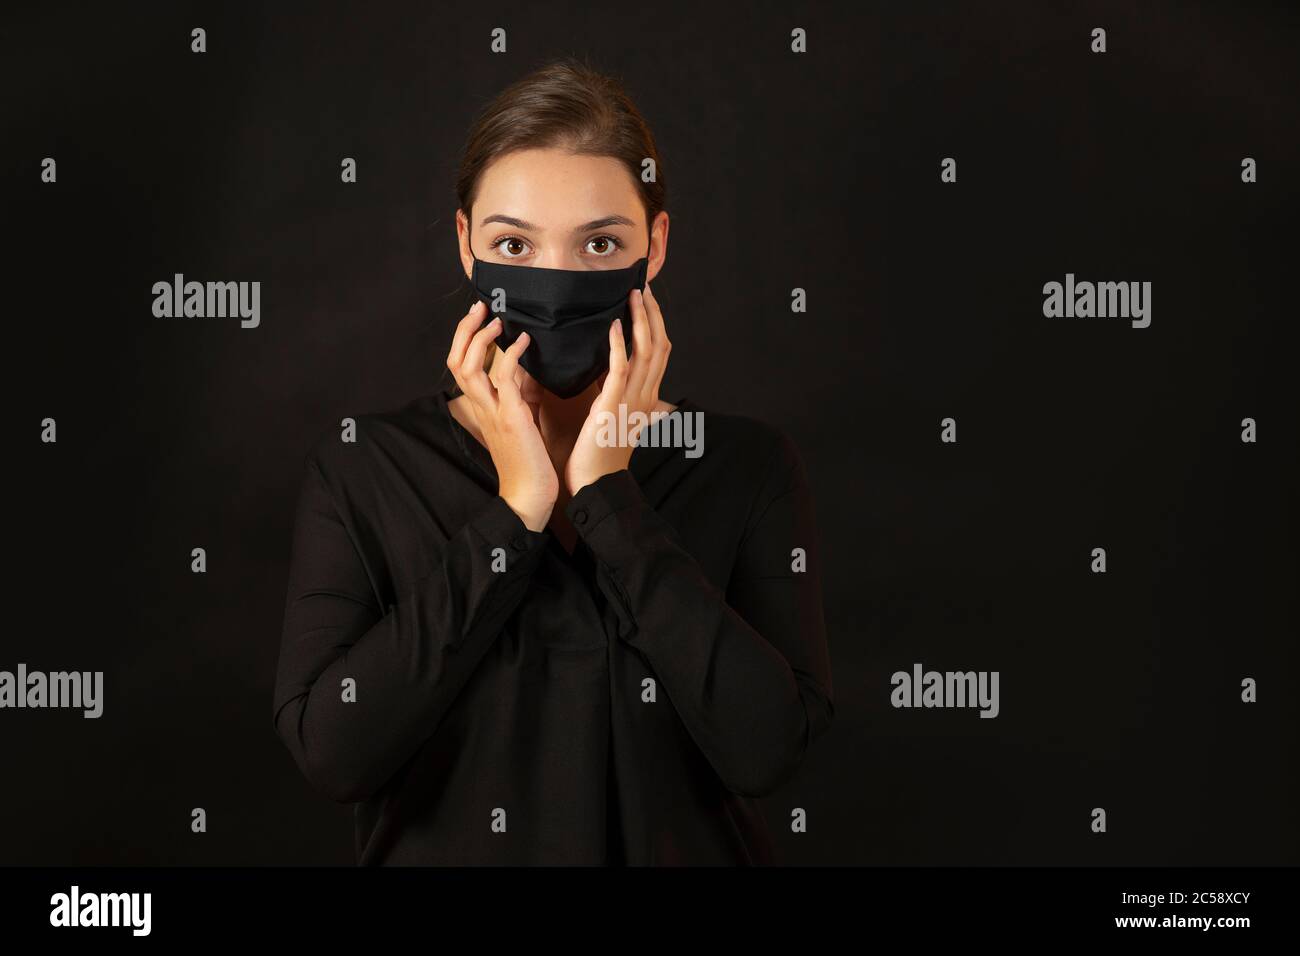 Brunette young woman touching her face in protective mask. Stock Photo